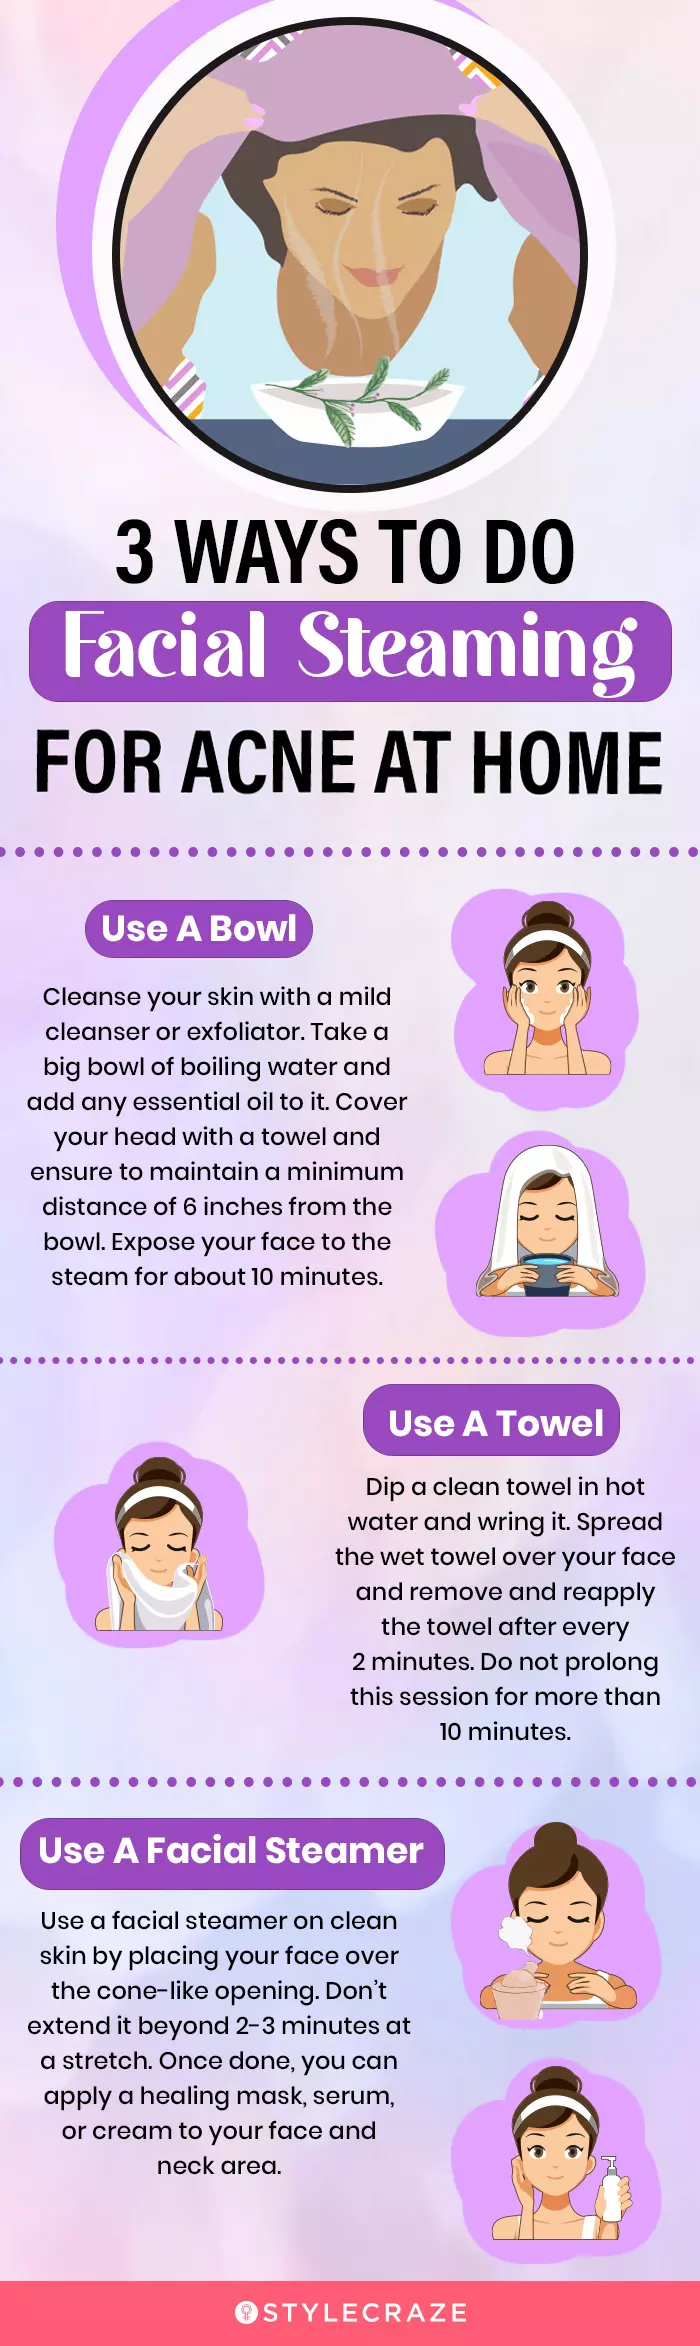 3 ways to do facial steaming for acne at home (infographic)